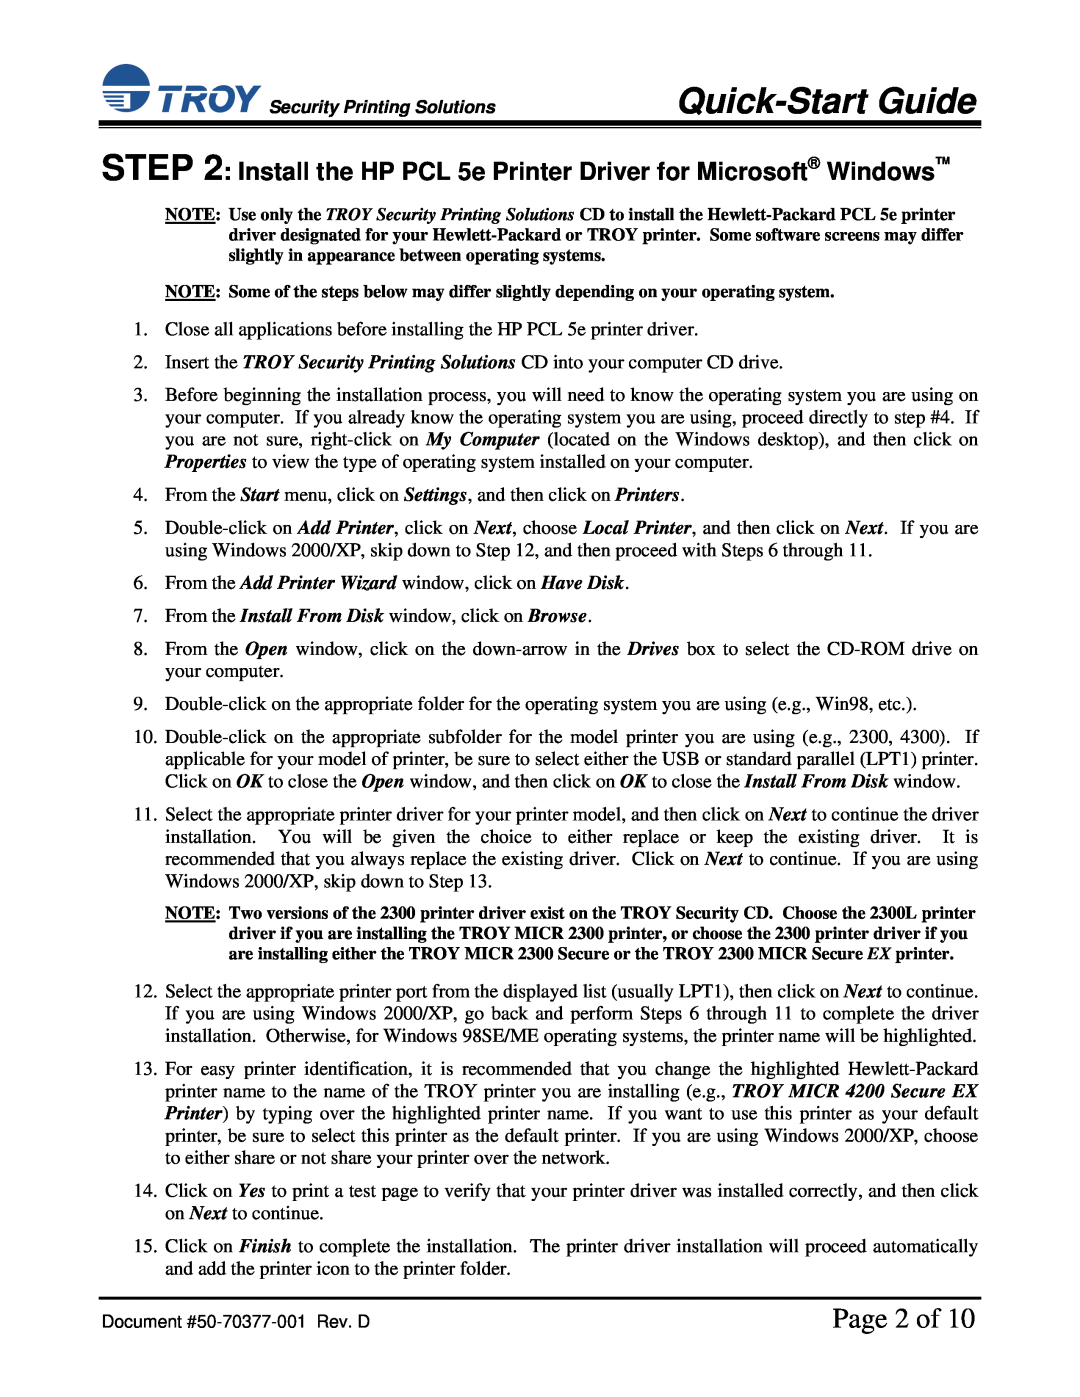 TROY Group IRD 4200 Page 2 of, Install the HP PCL 5e Printer Driver for Microsoft Windows, Quick-Start Guide 